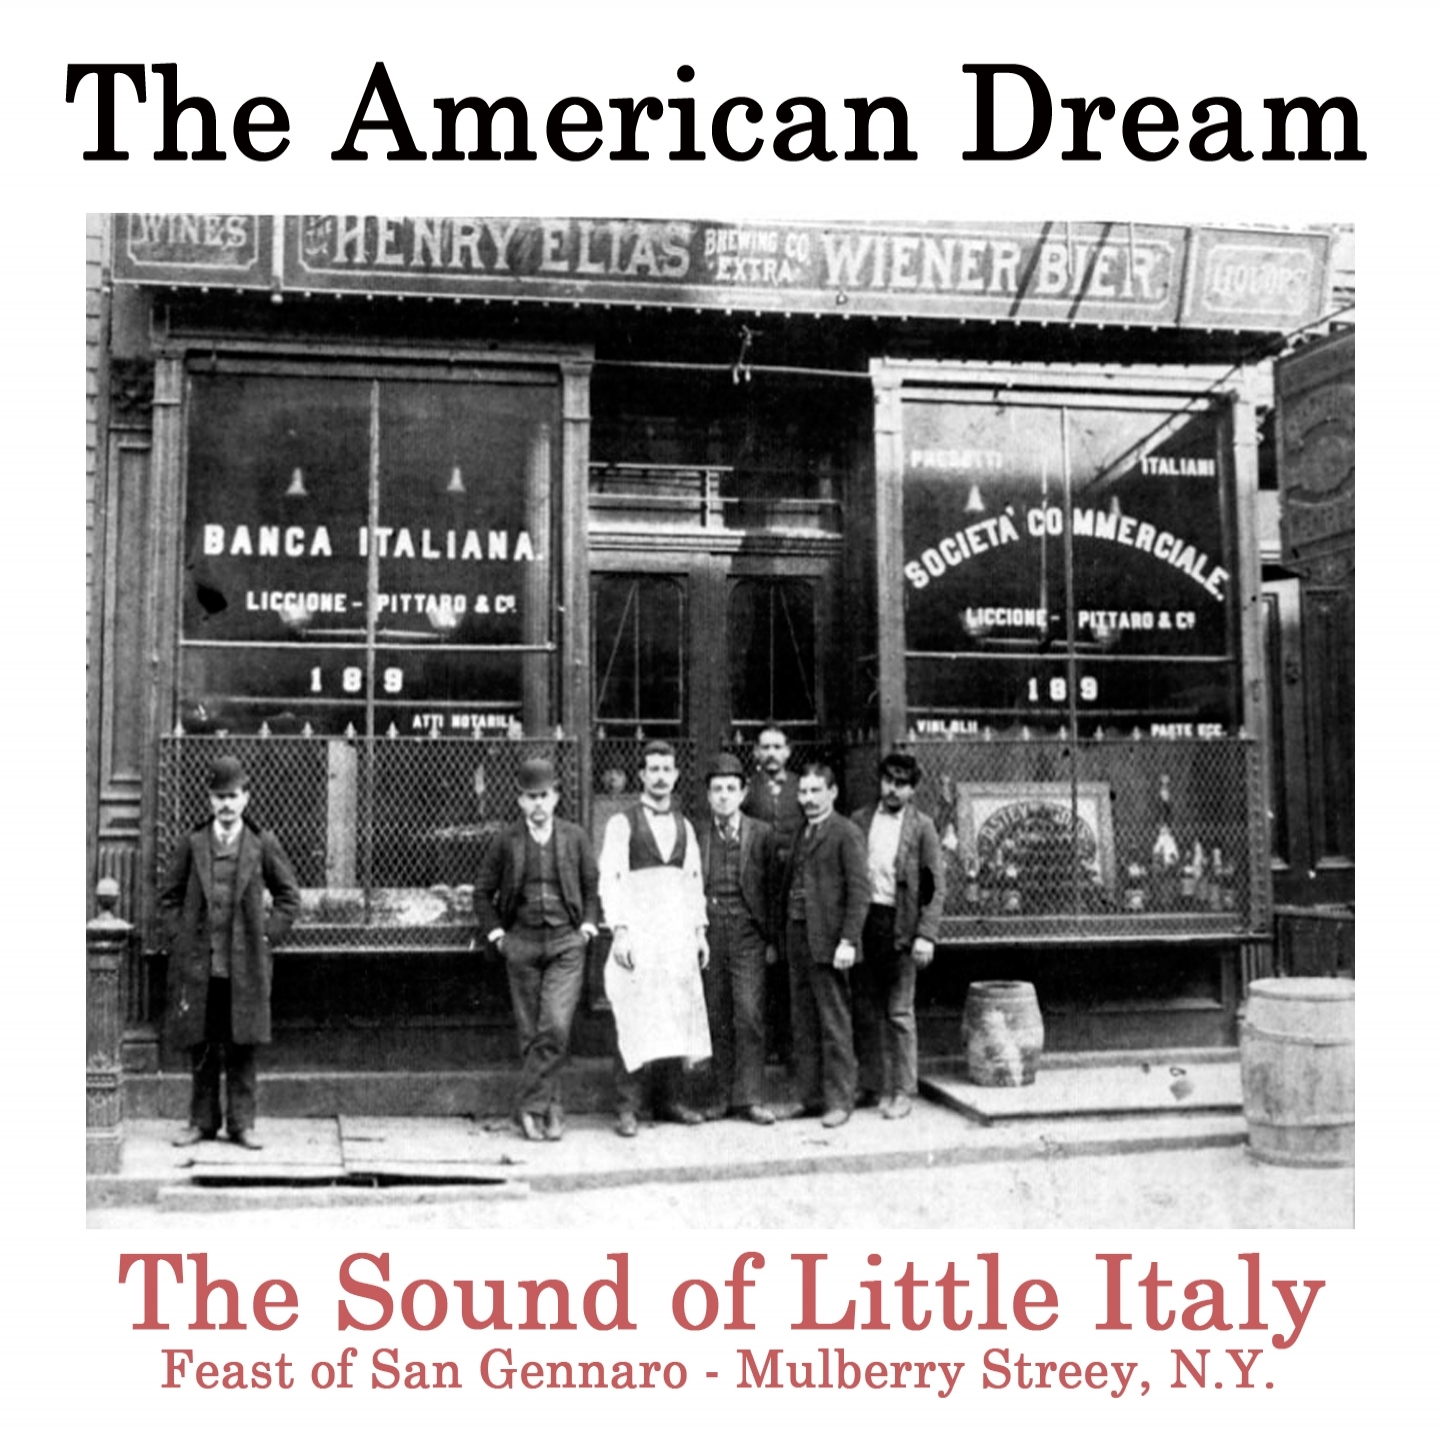 The American Dream: The Sound of Little Italy